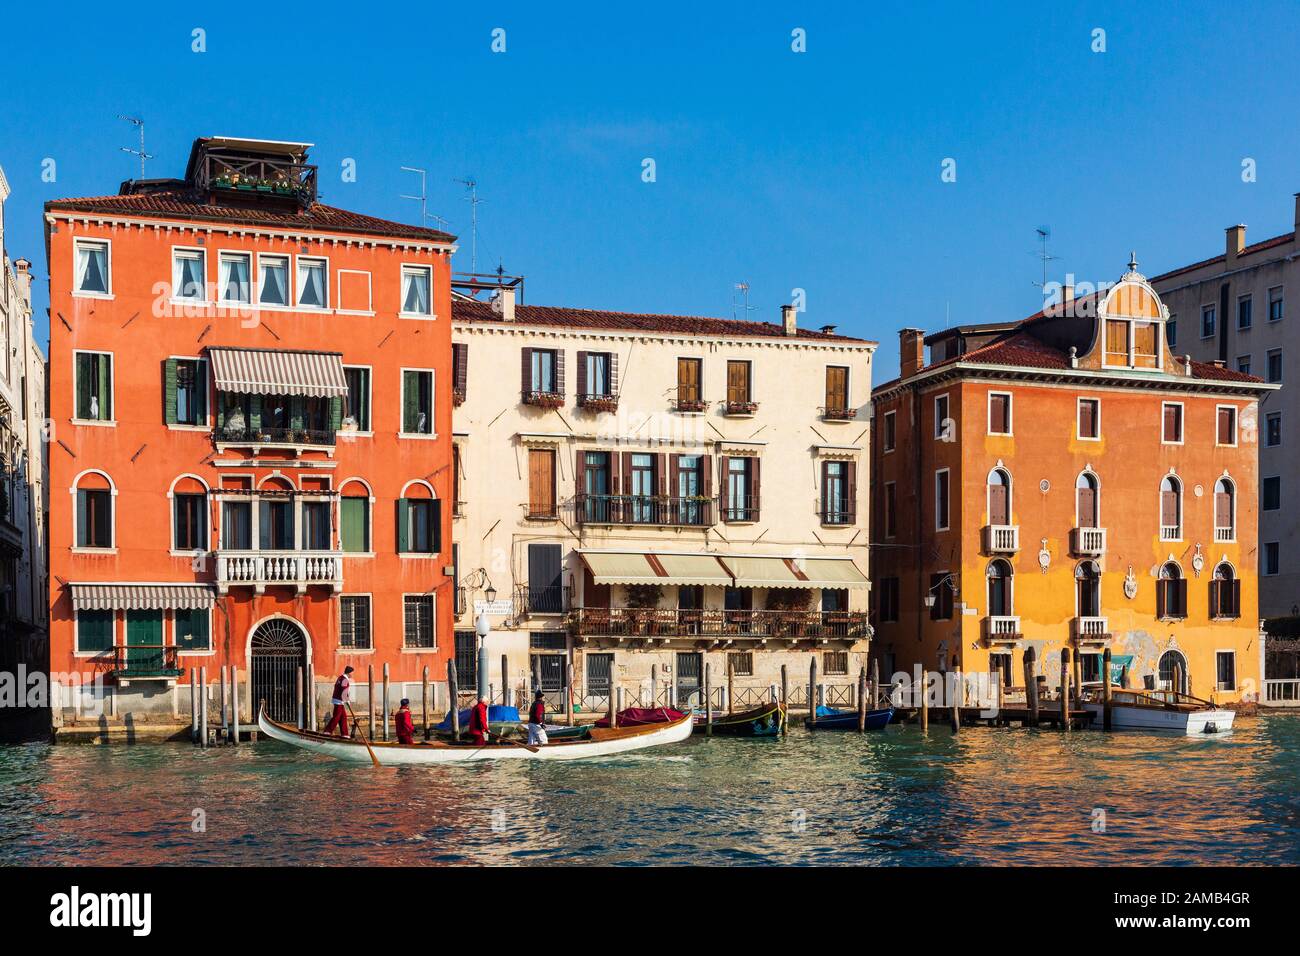 Boat in front of palaces on the Grand Canal, Venice, Veneto, Italy, Europe Stock Photo